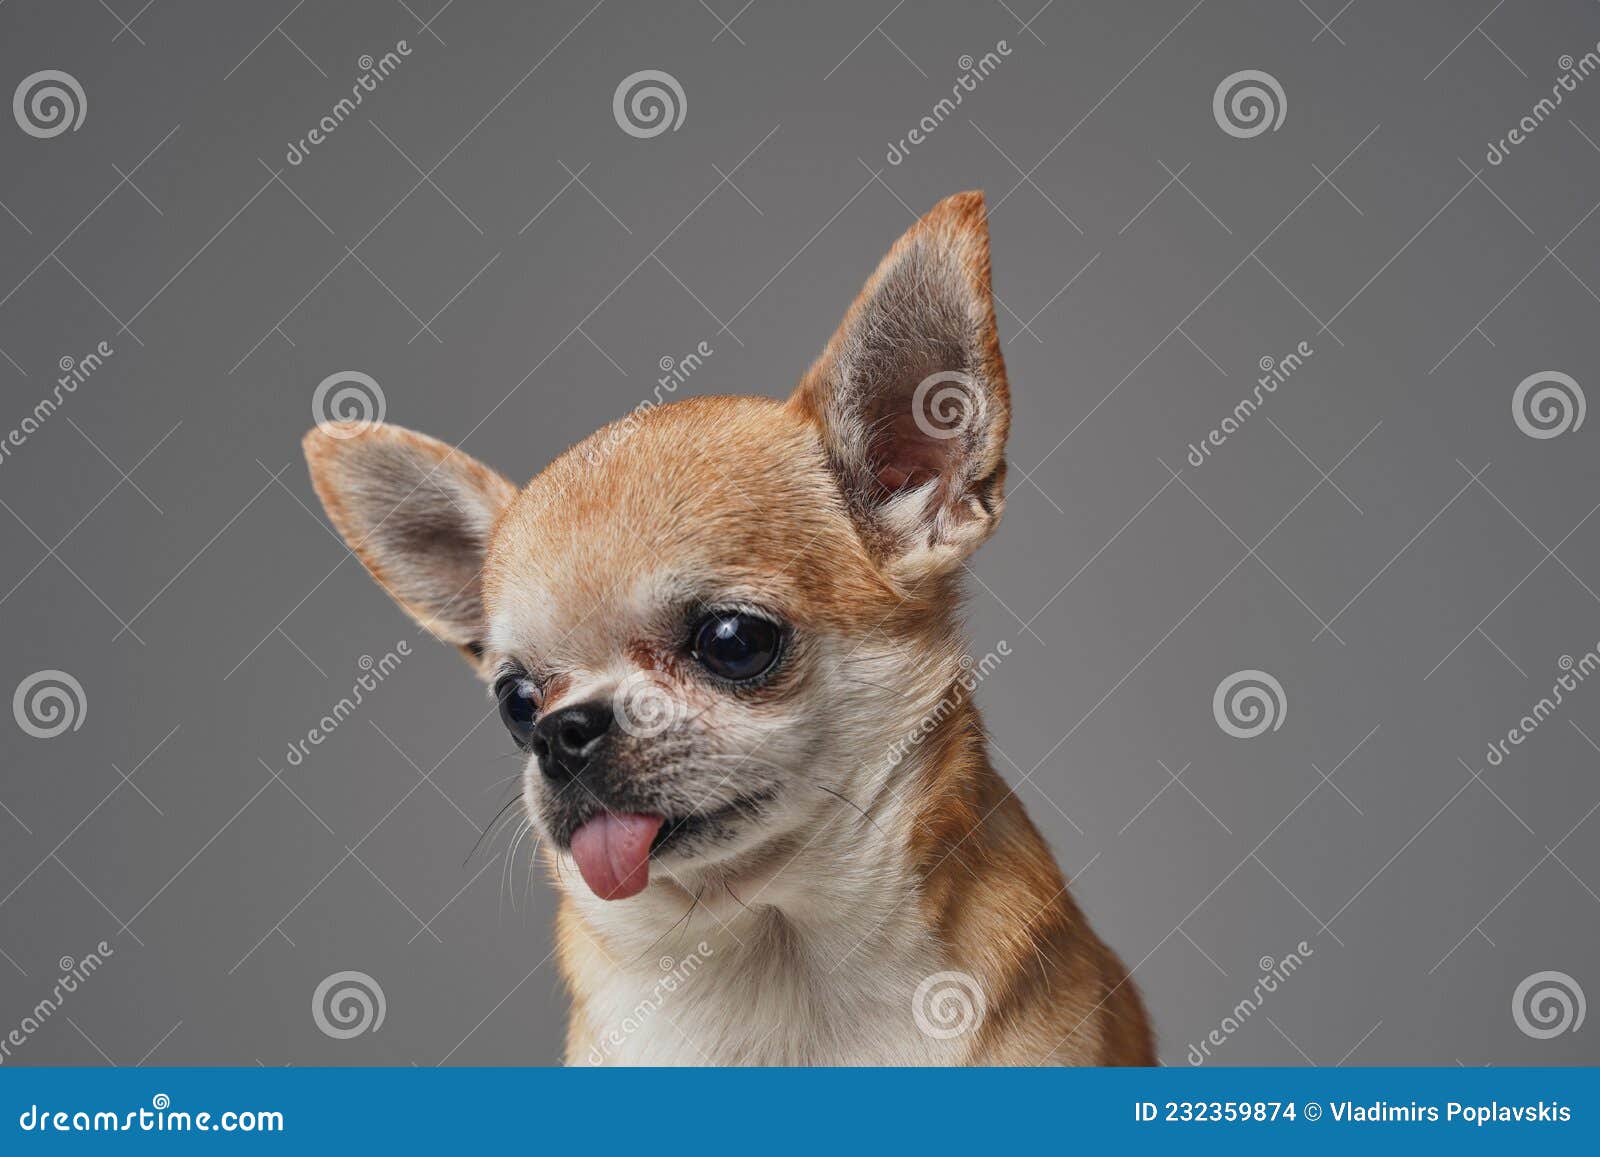 Amusing Petite Dog Chihuahua Breed Against Gray Background Stock Photo -  Image of animal, little: 232359874